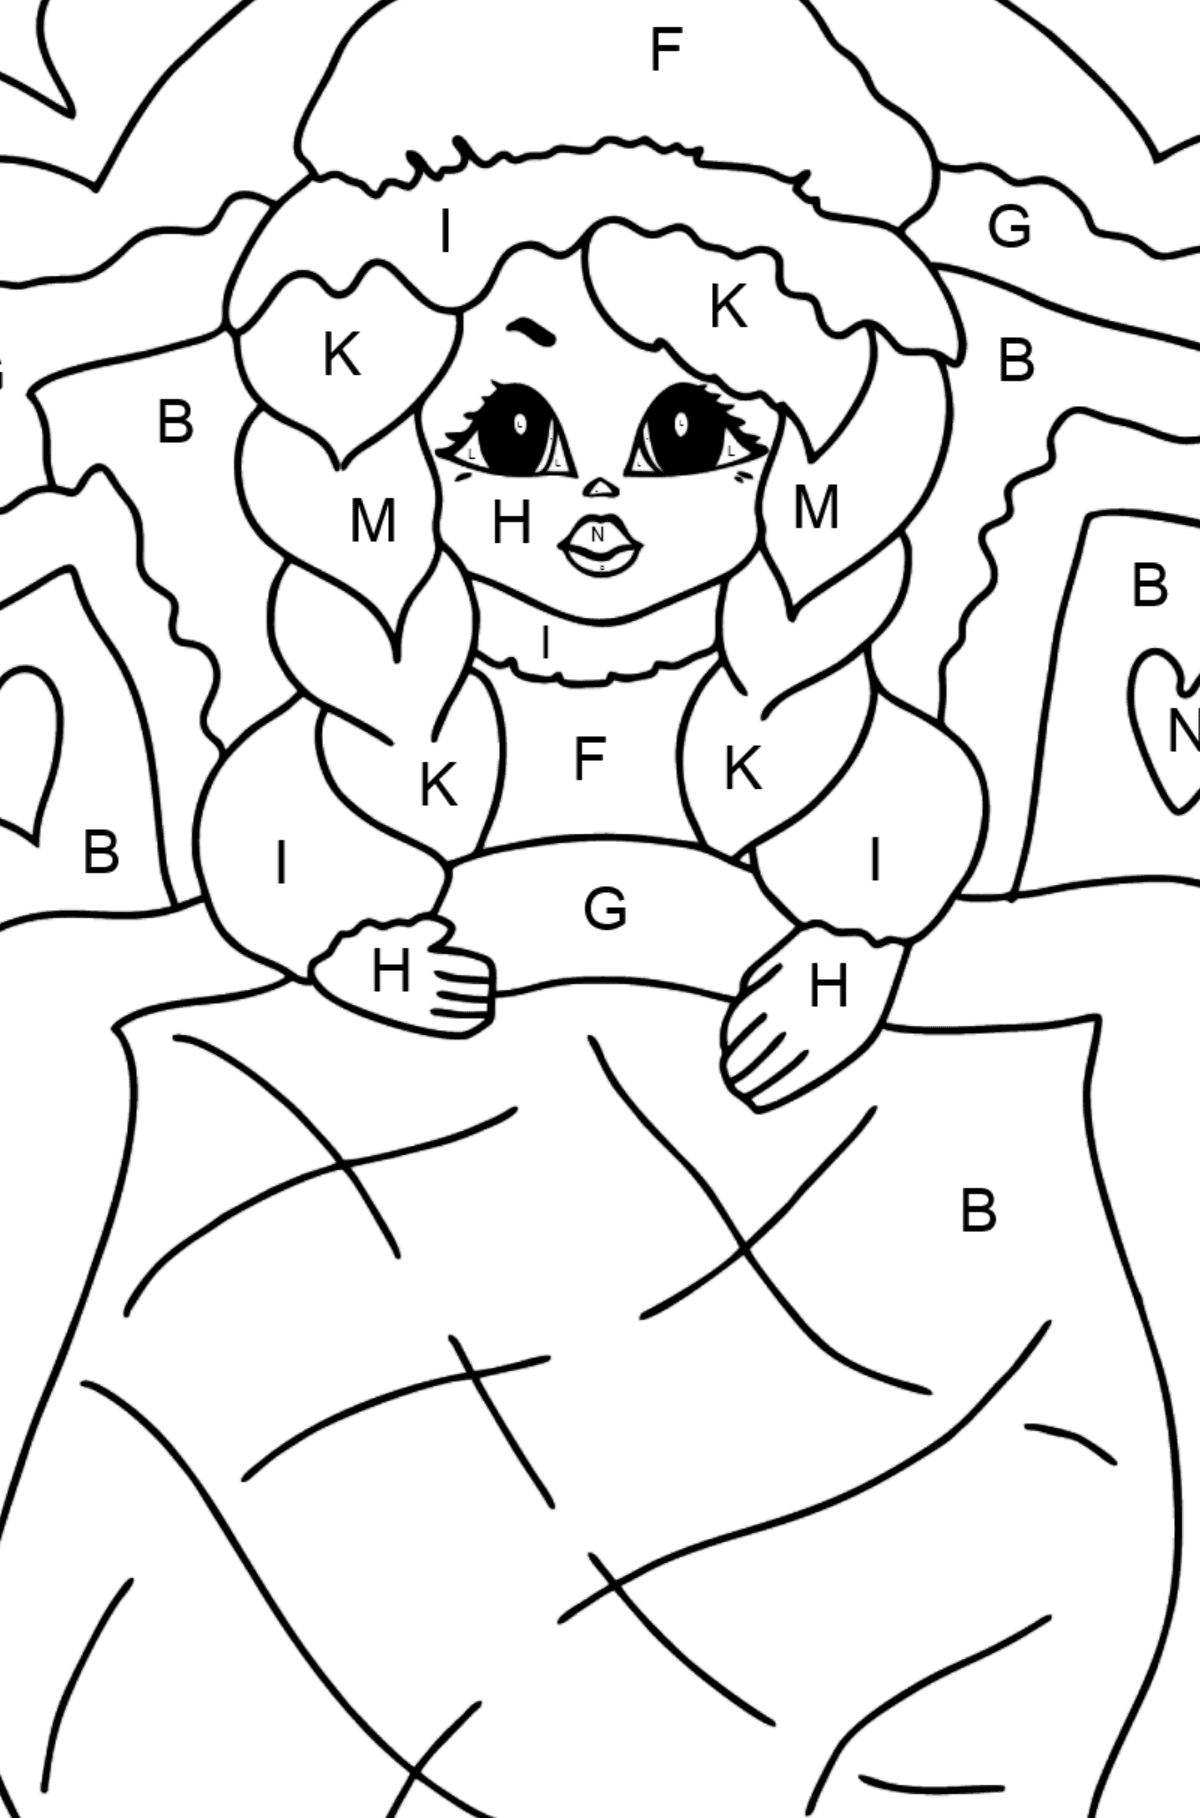 Coloring Page - A Princess in a Bed - for Girls - Coloring by Letters for Kids